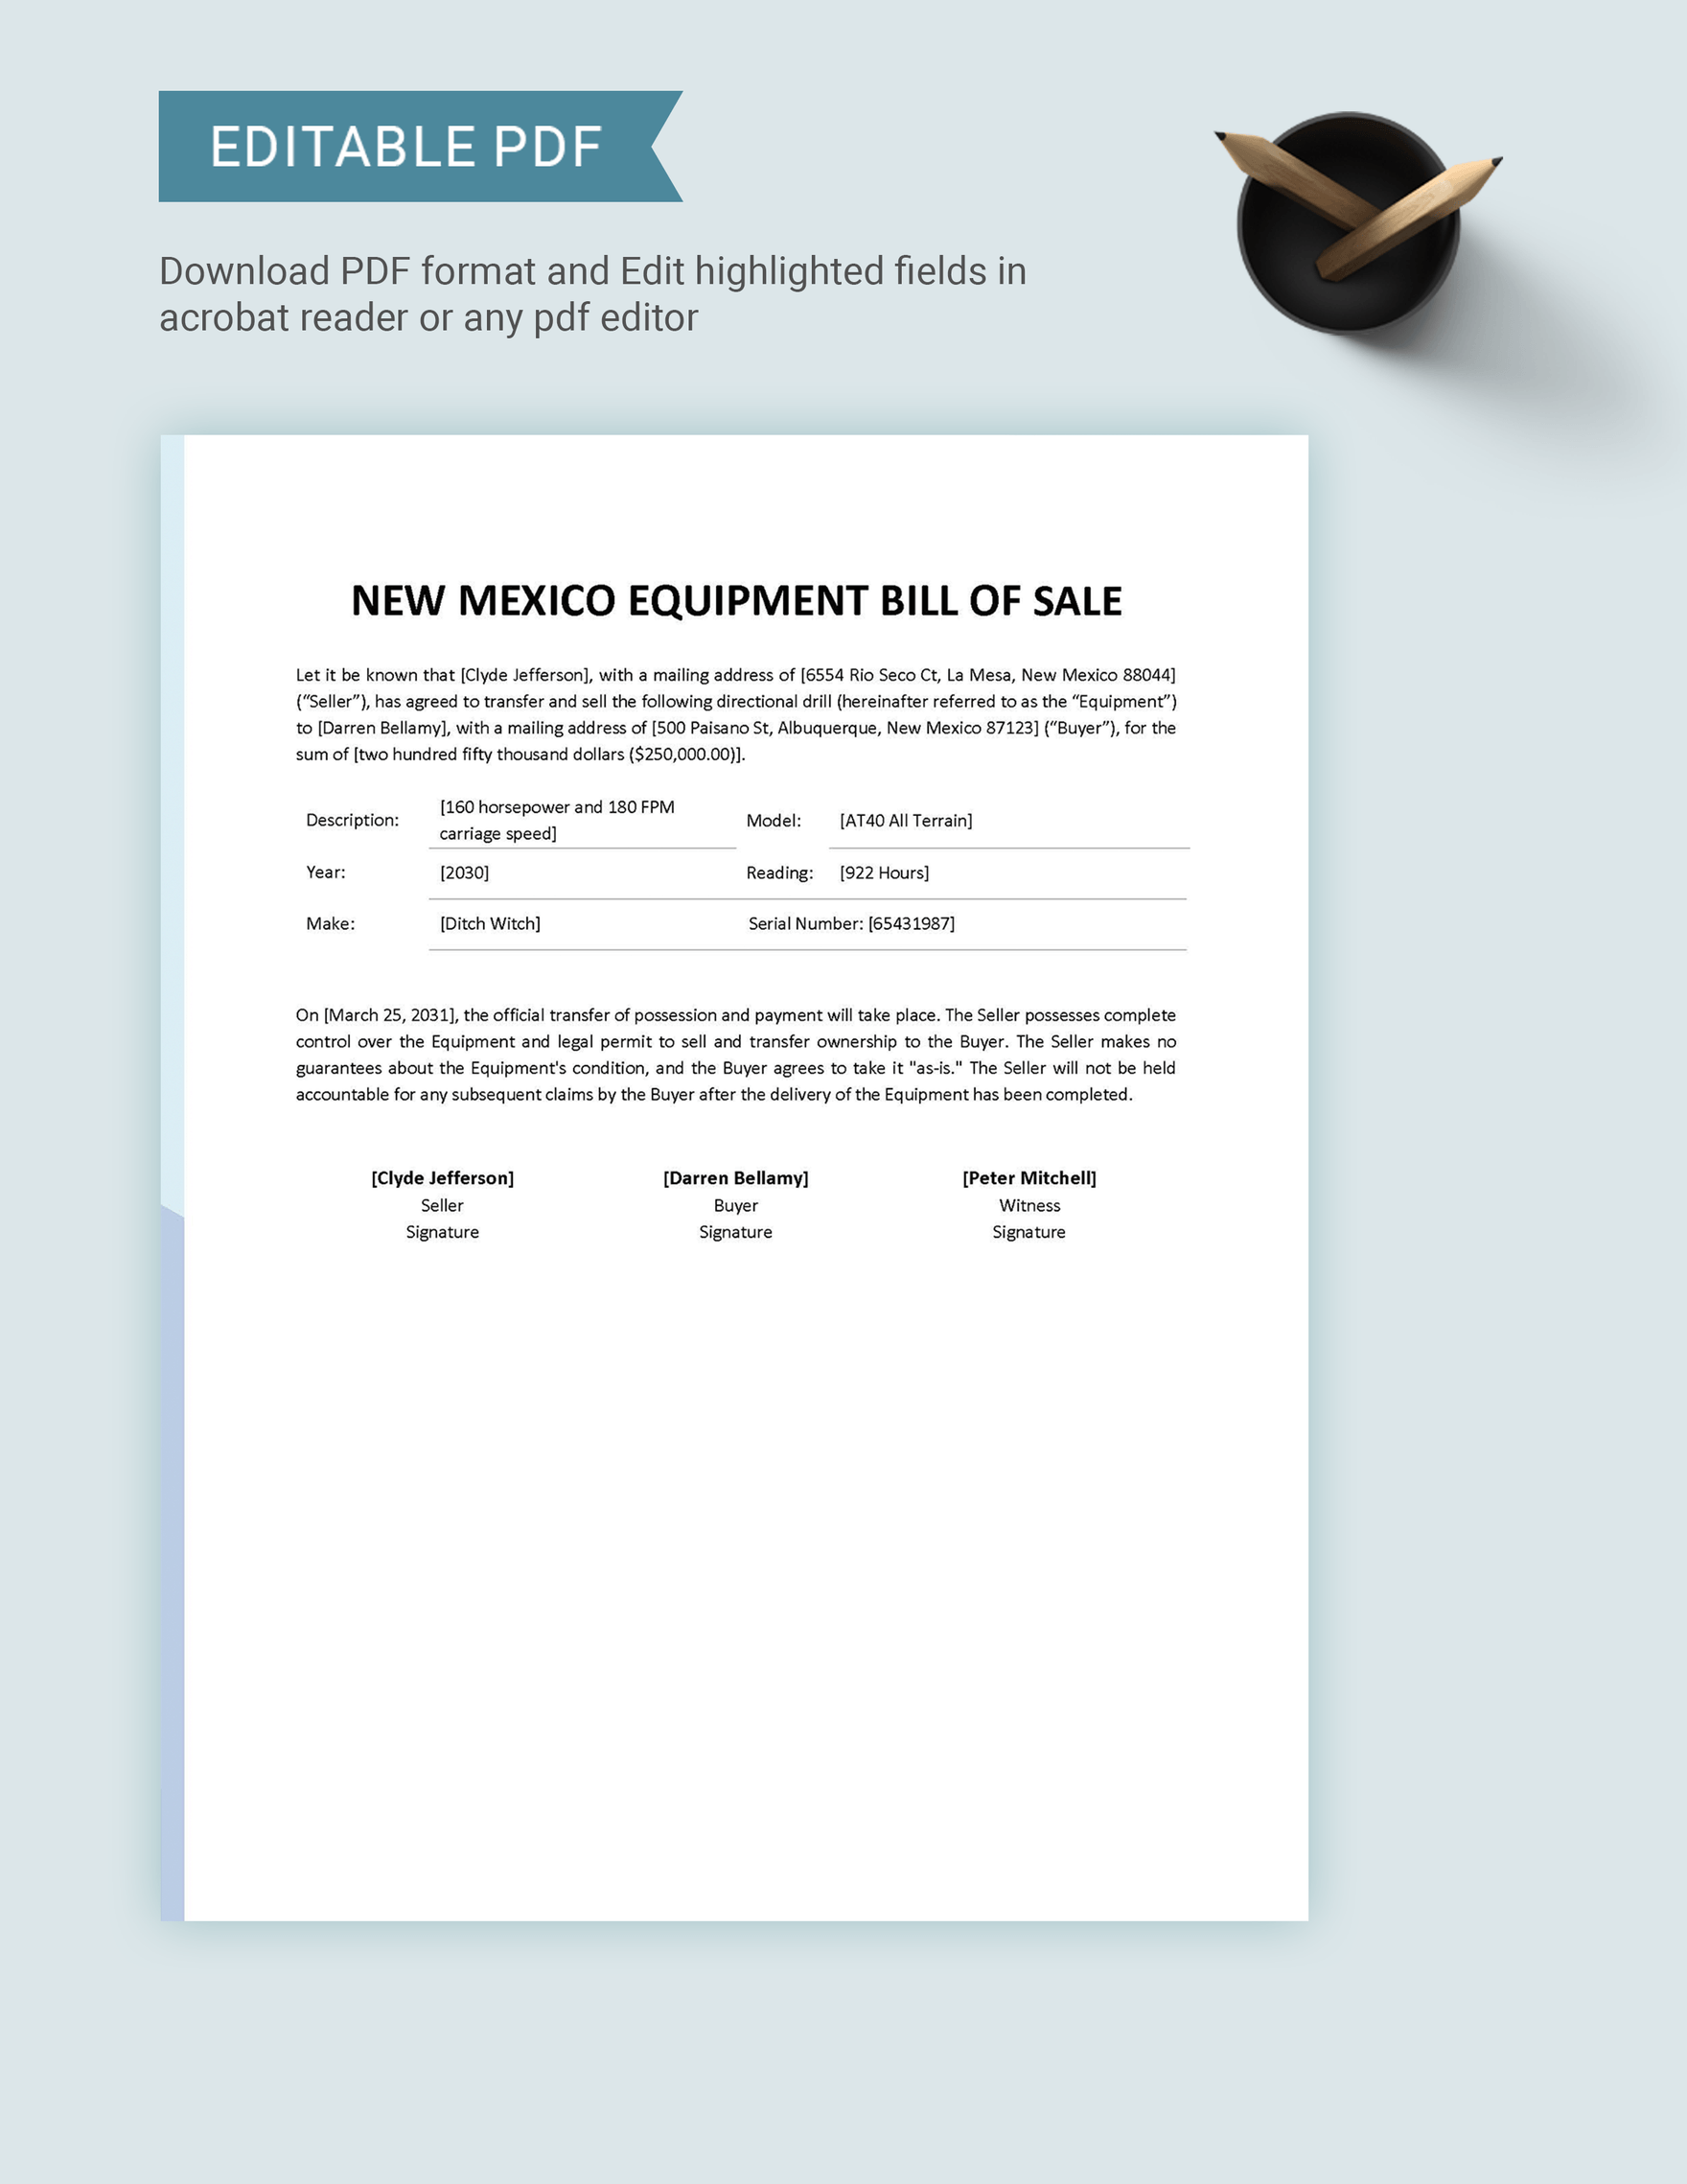 New Mexico Equipment Bill of Sale Form Template